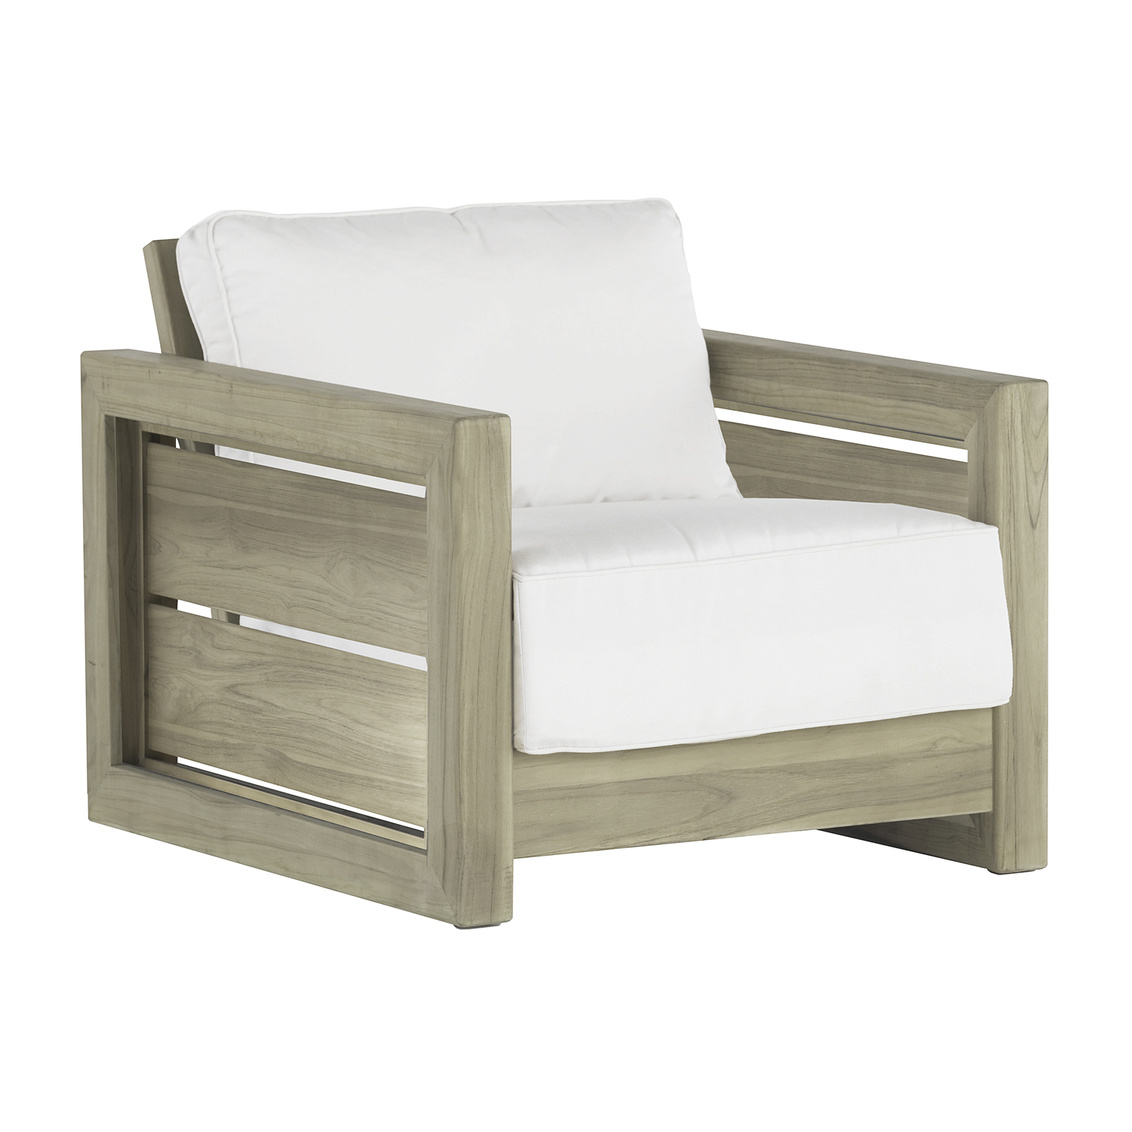 bali lounge in oyster teak – frame only product image